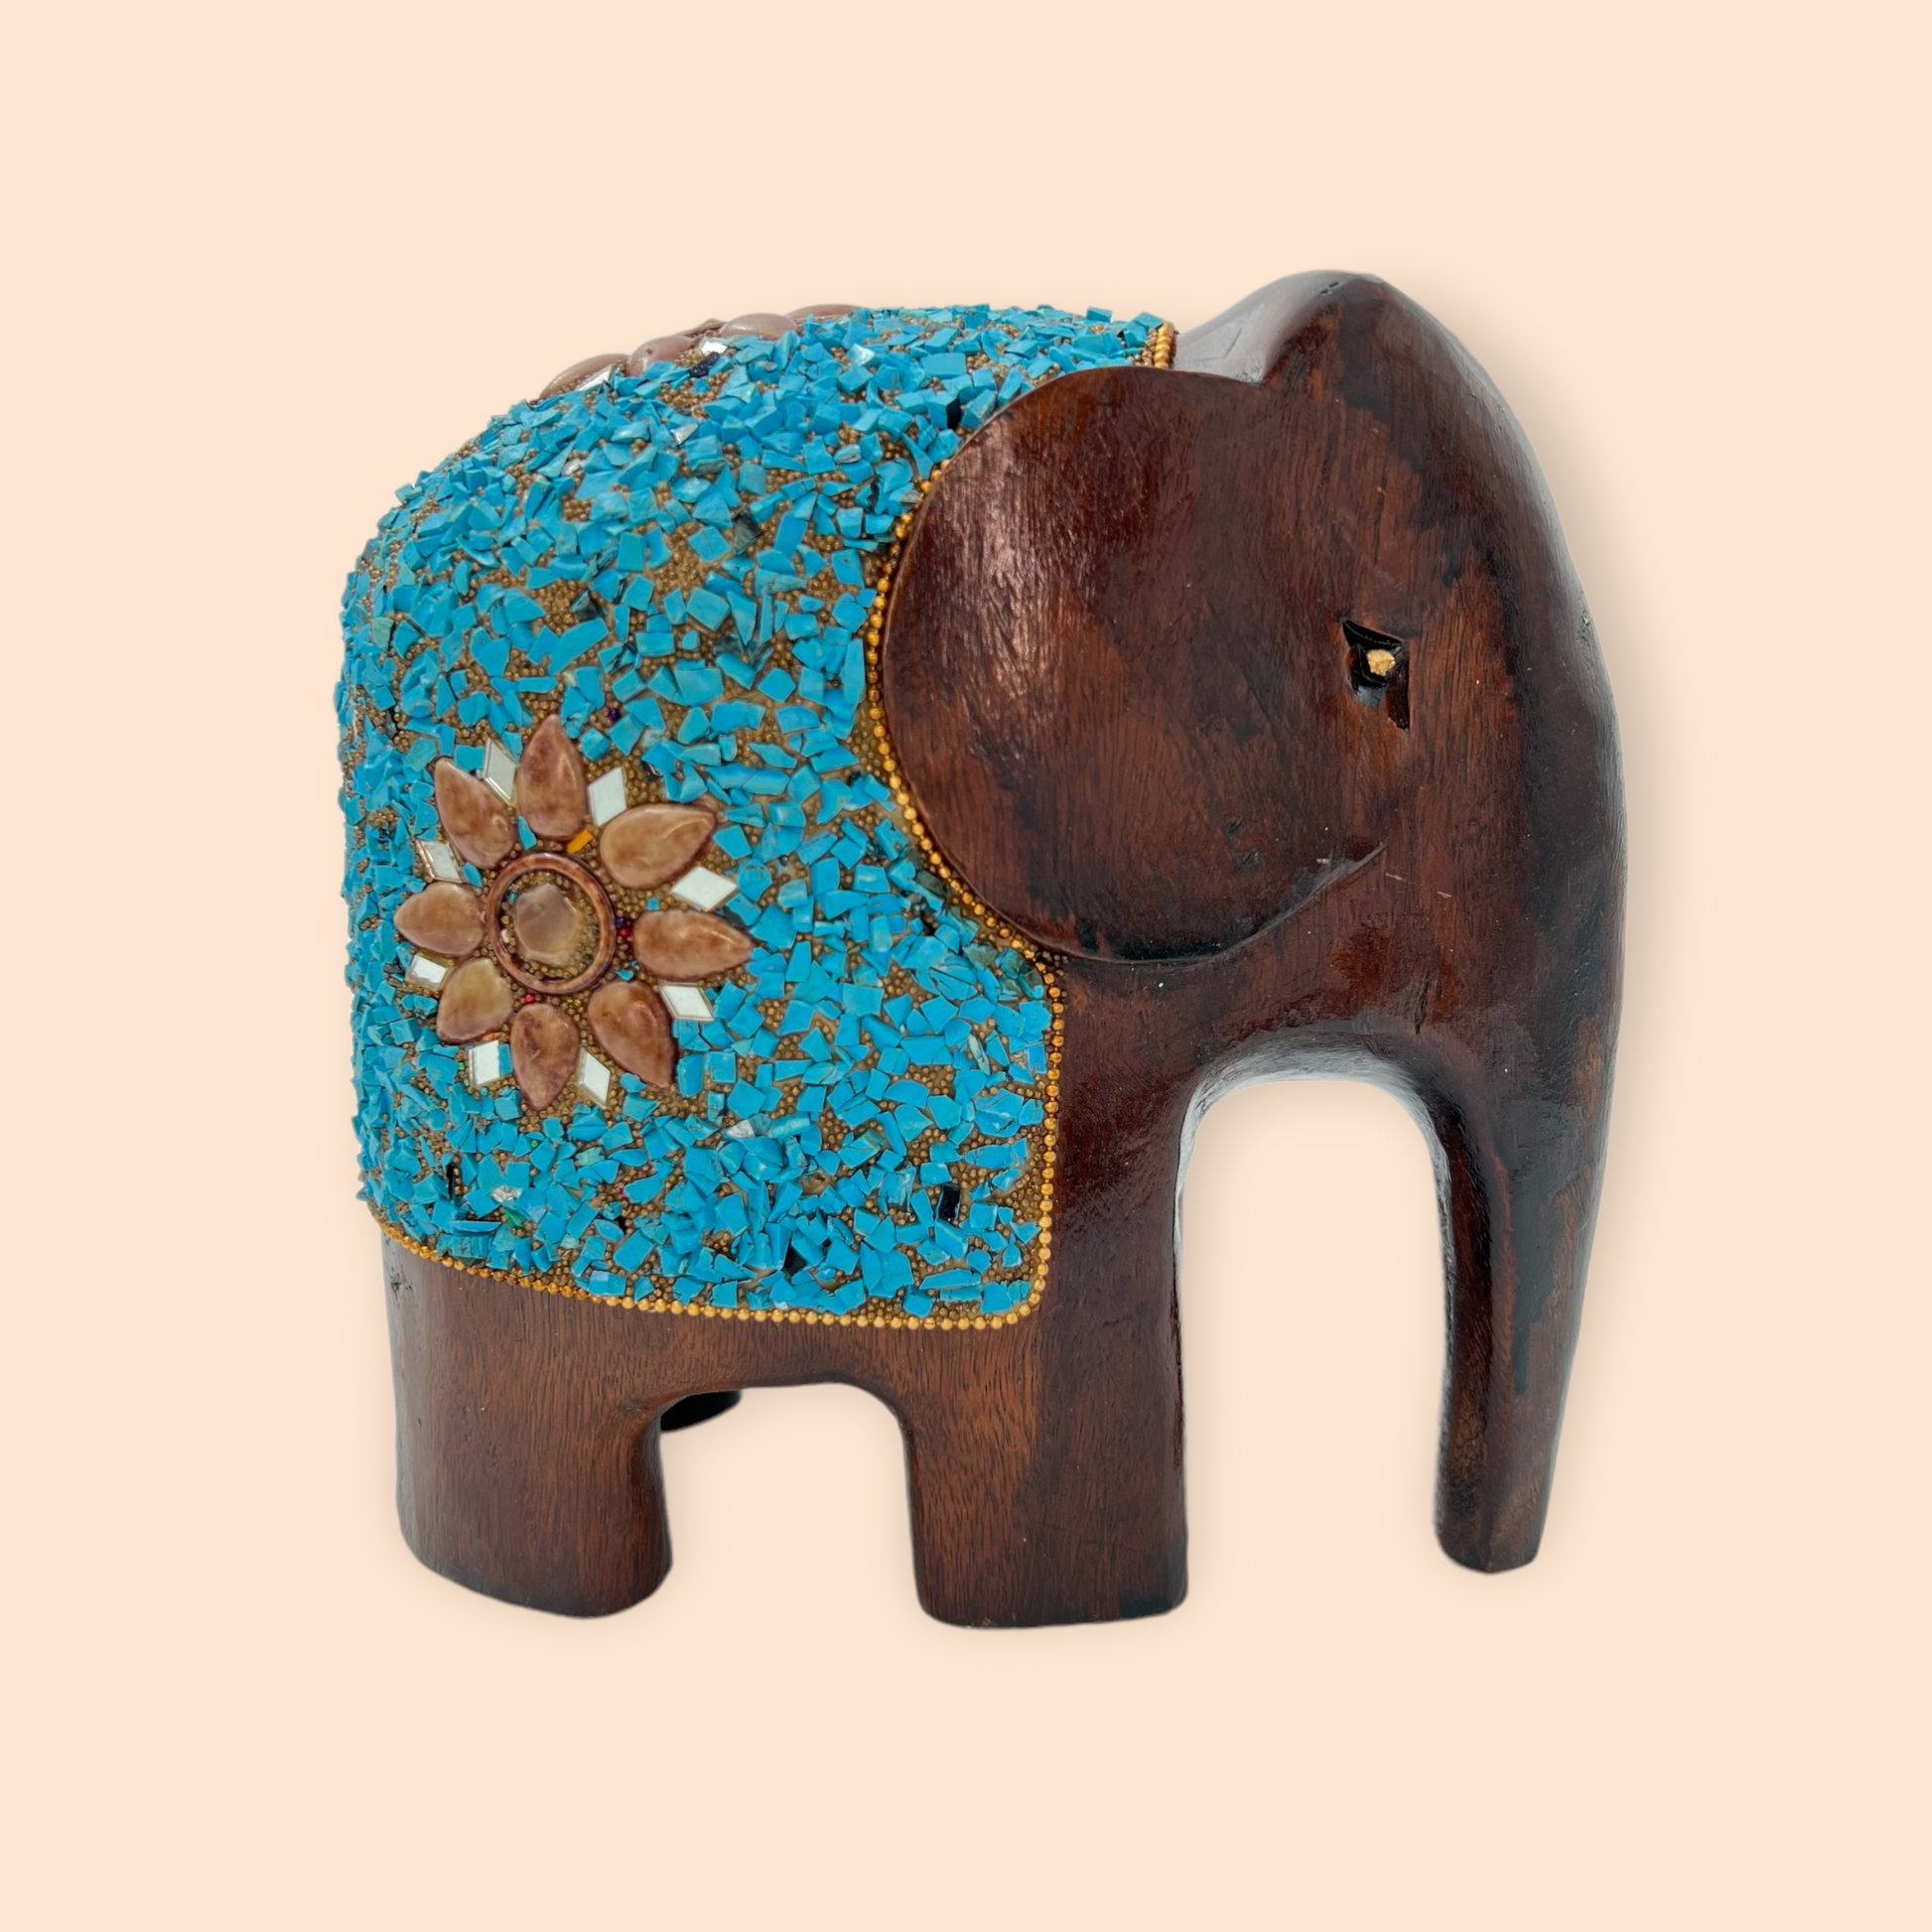 Image of Wooden Elephant with Turquoise Stone Work. The Source India is an Indian Handicraft, Home Decor, Furnishing and Textiles Store. Our Mission is to allow the enhancement of India's Culture